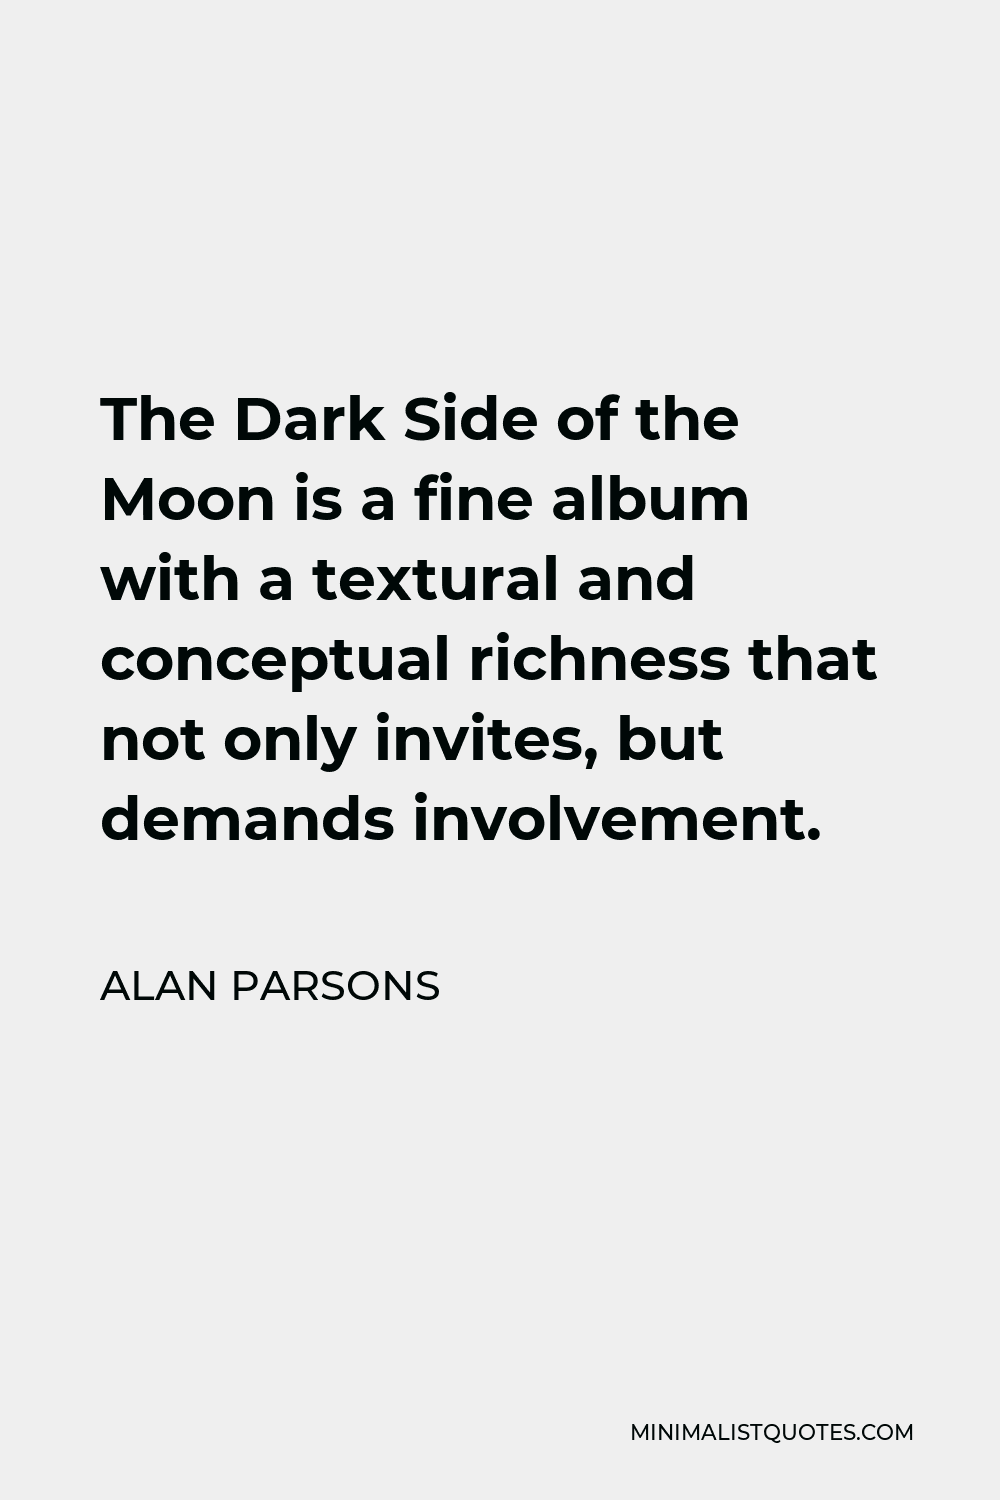 Alan Parsons Quote - The Dark Side of the Moon is a fine album with a textural and conceptual richness that not only invites, but demands involvement.